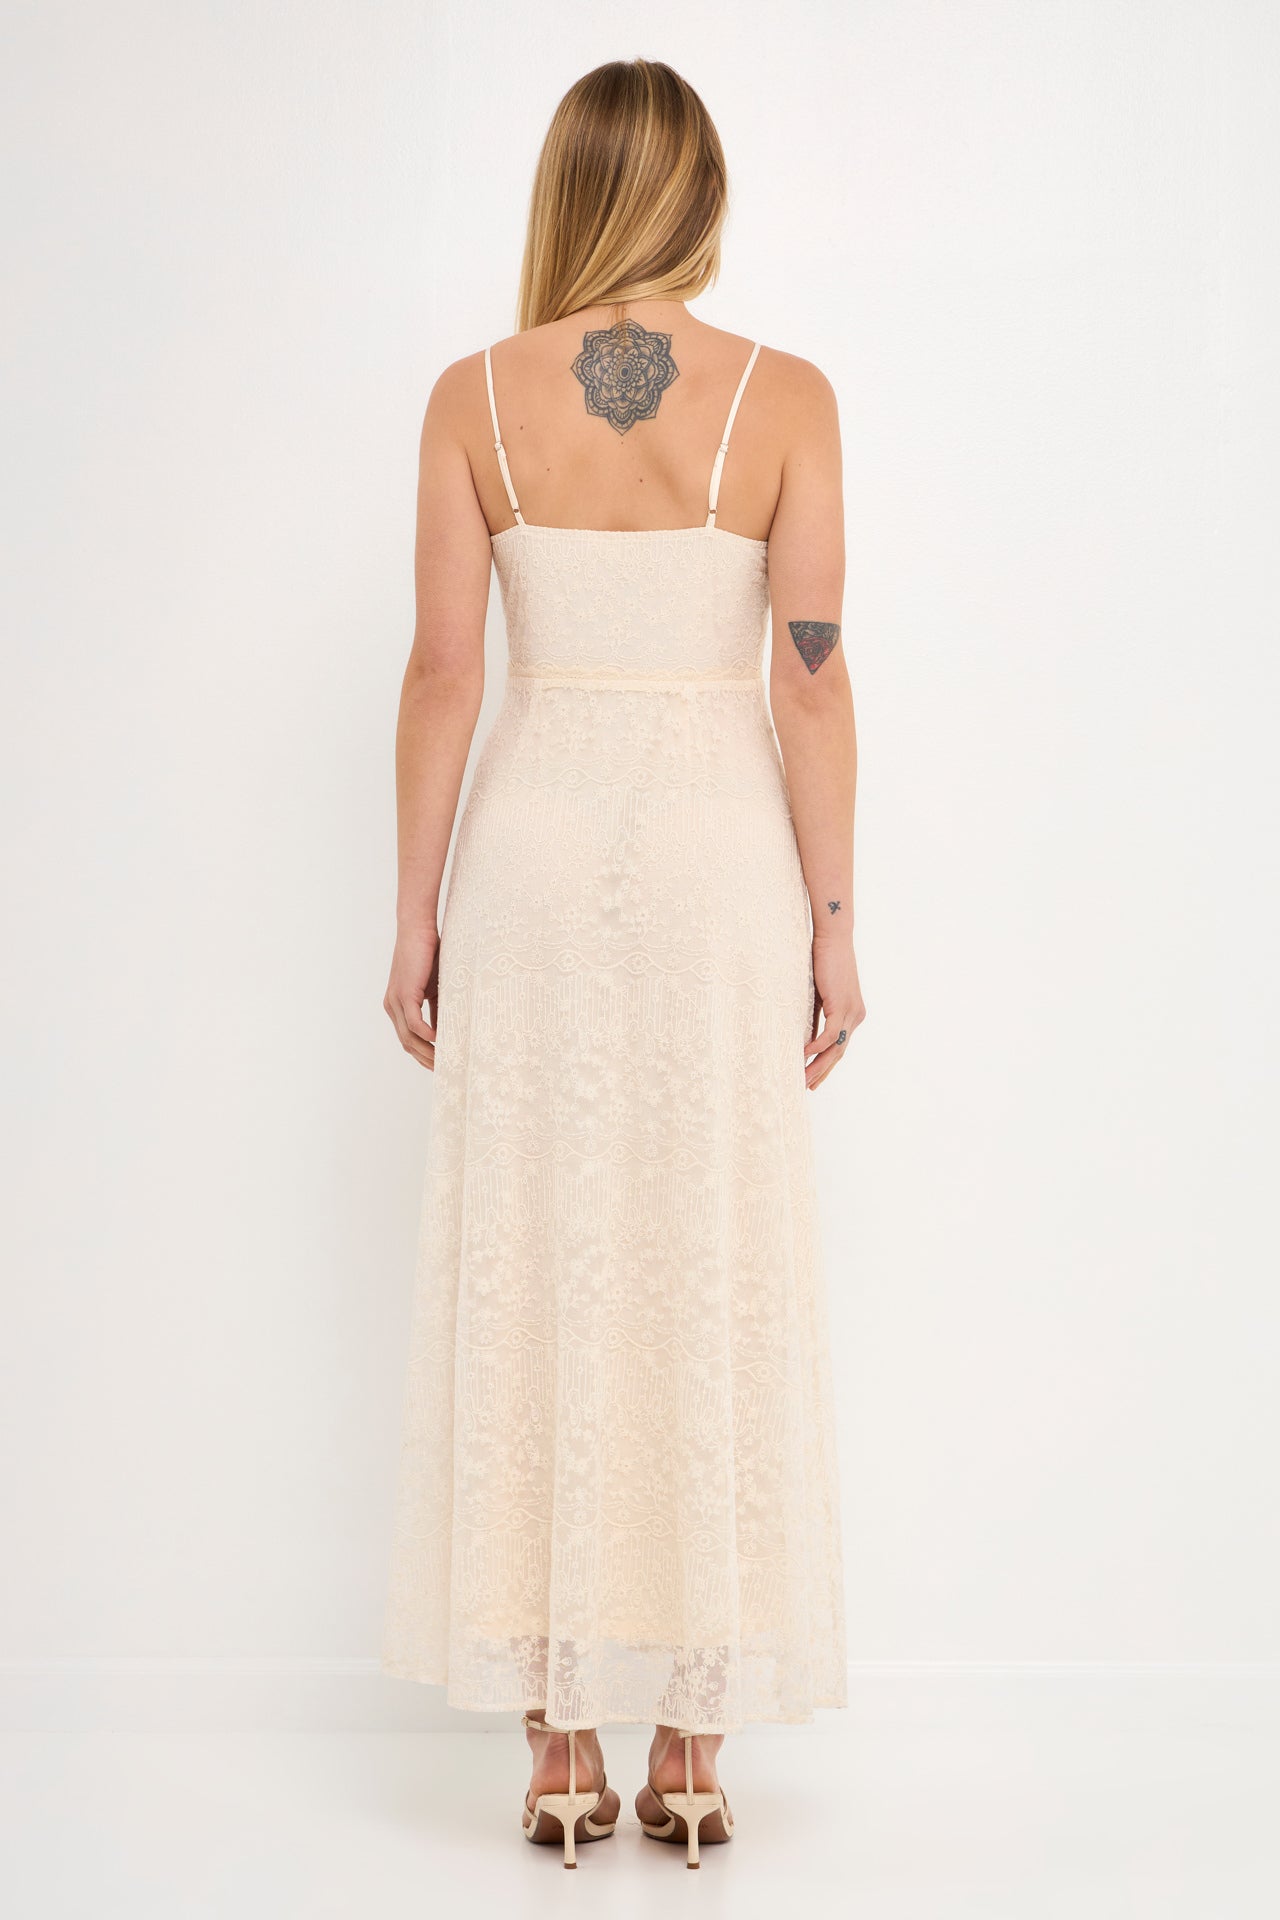 FREE THE ROSES - Embroidered Lace Camisole Dress - DRESSES available at Objectrare